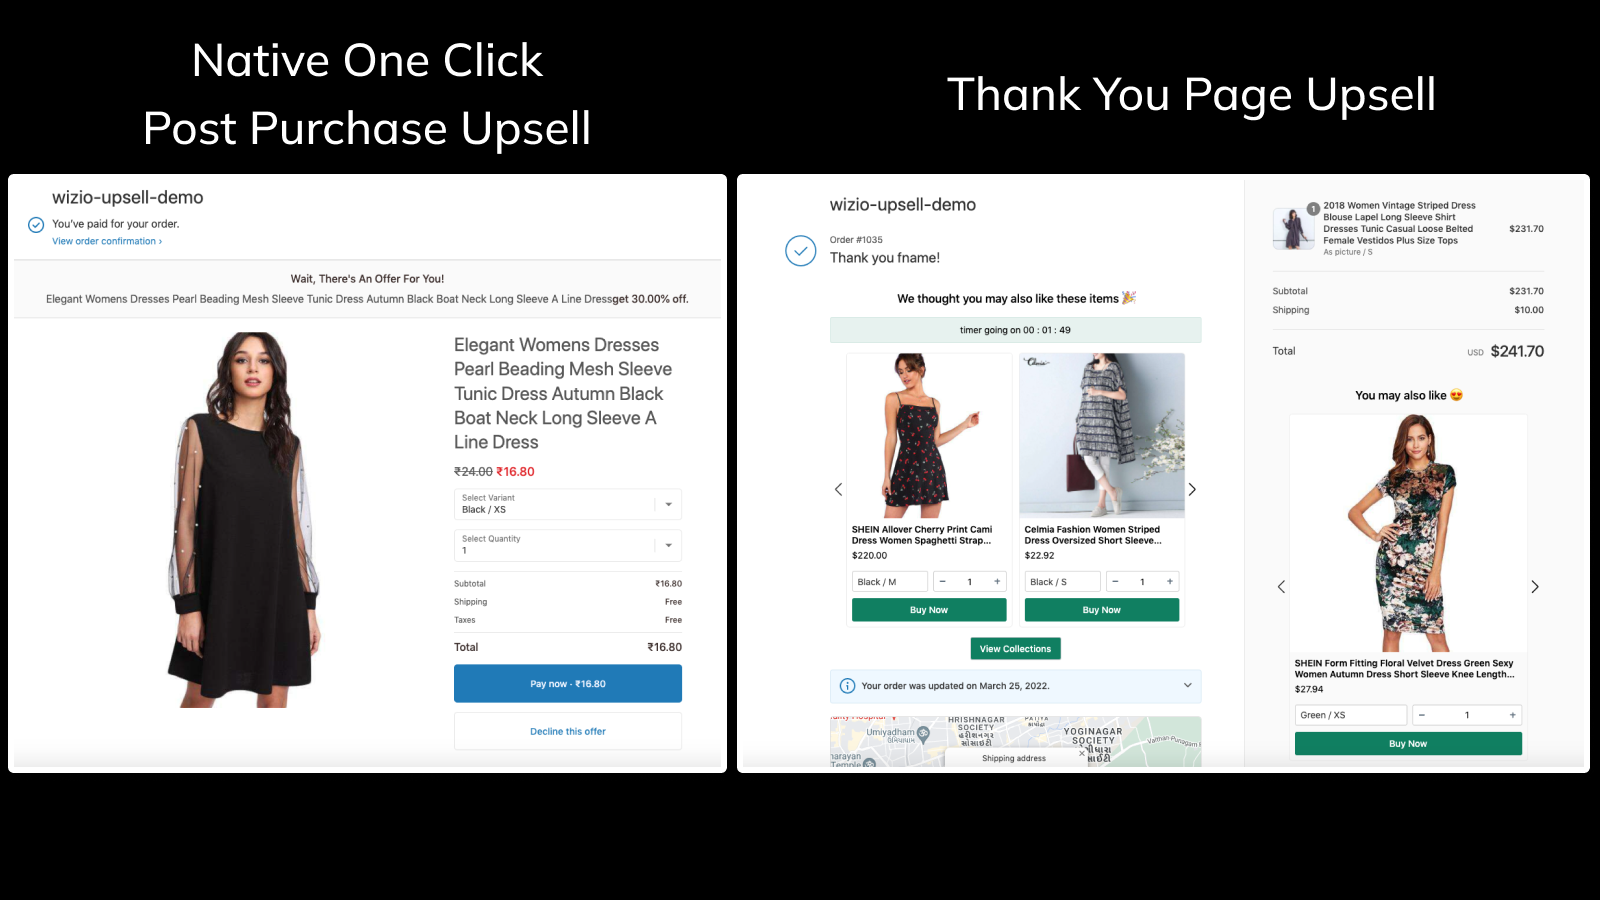 native one click post purchase and thank you page upsell